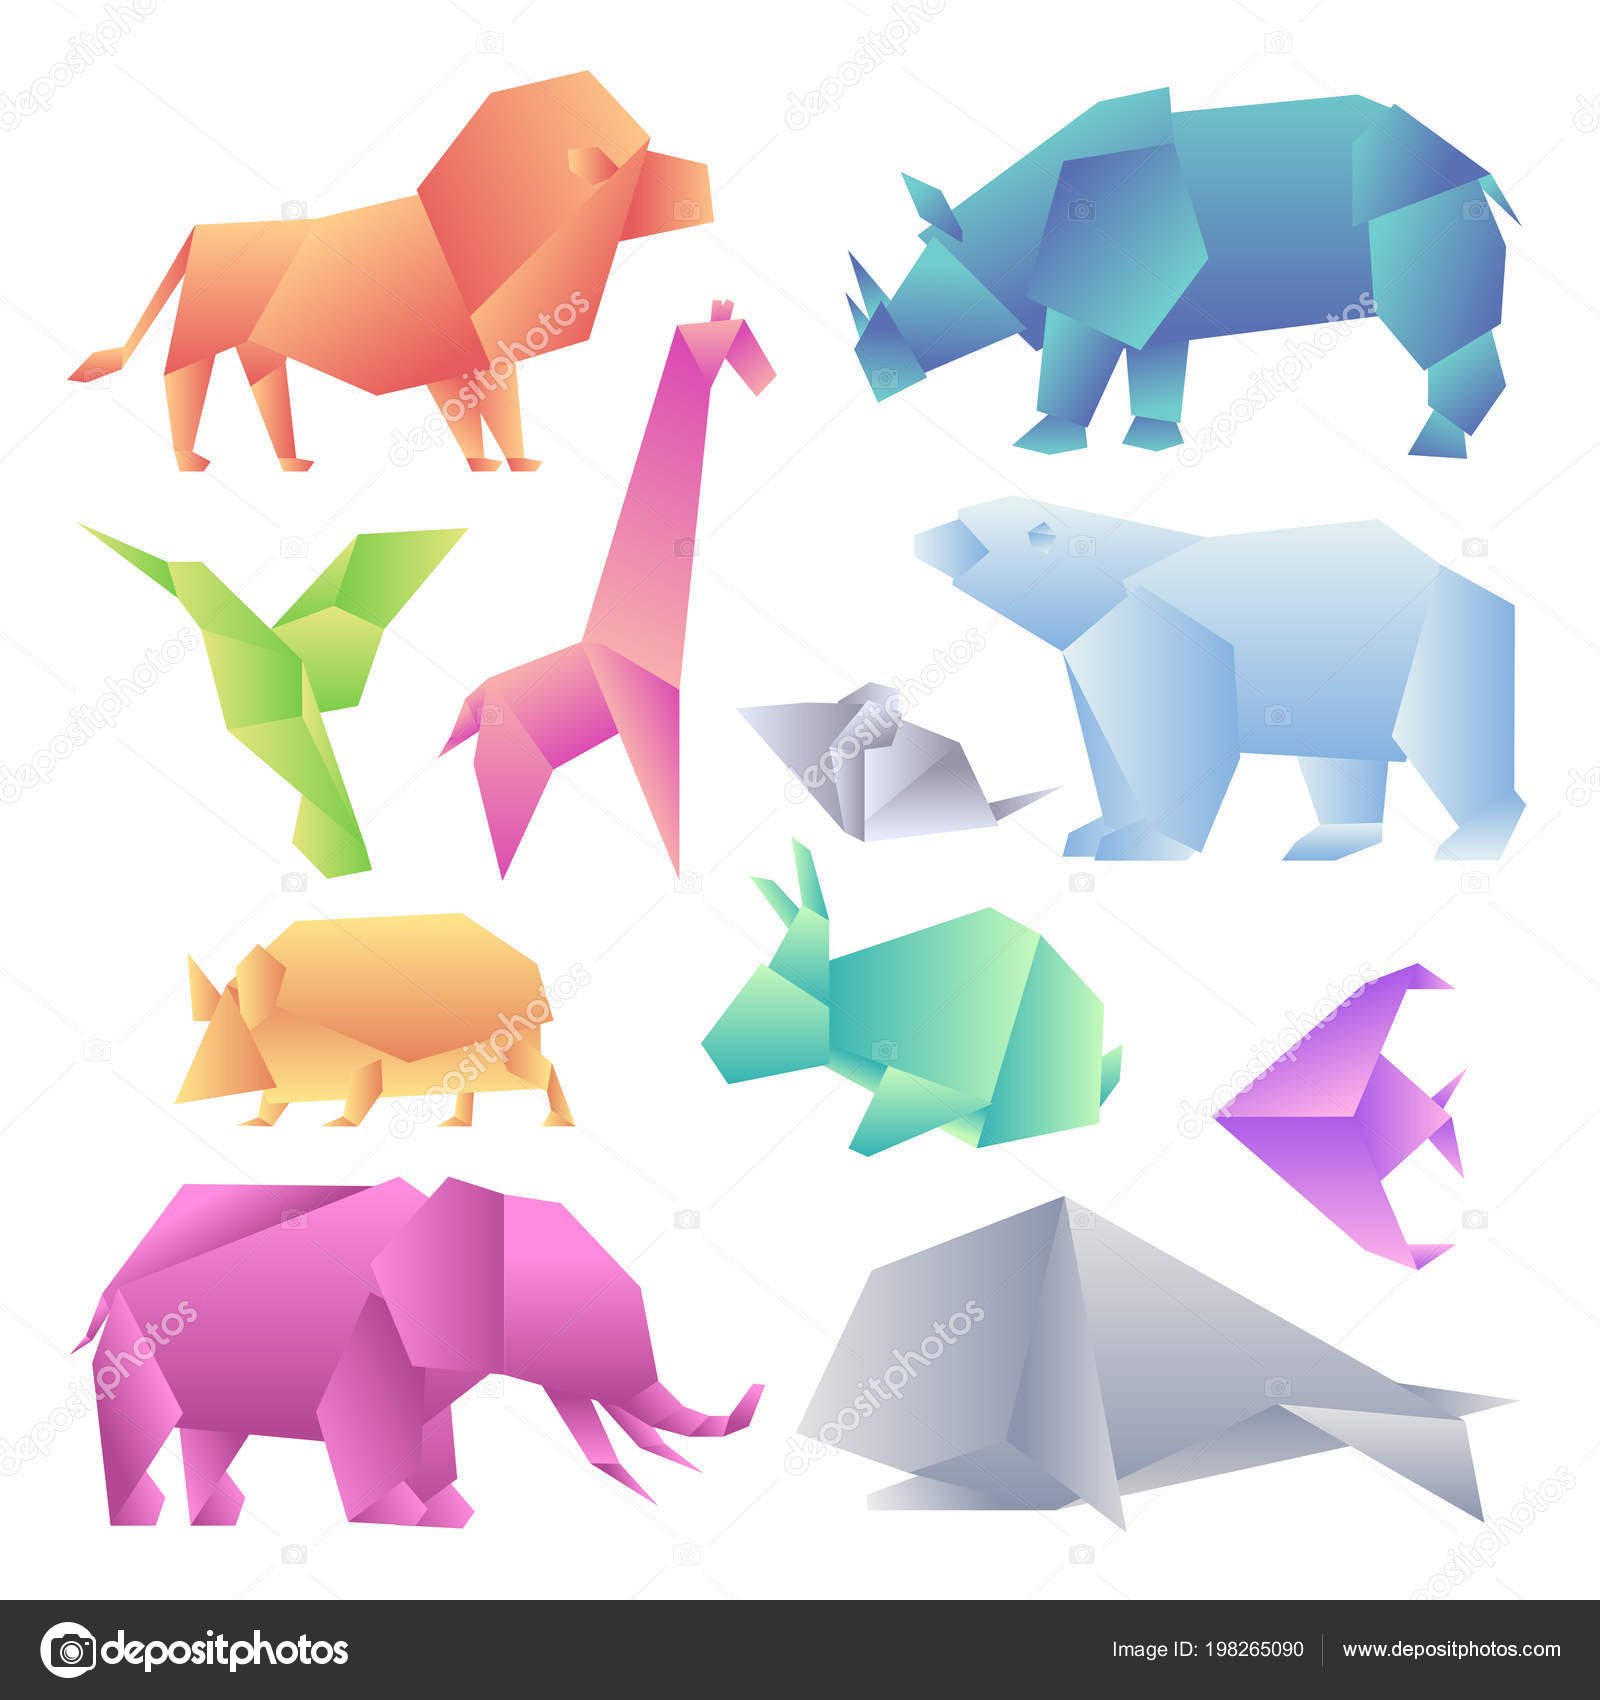 Origami Hummingbird Step By Step Low Poly Modern Gradient Animals Set Origami Gradient Paper Animals